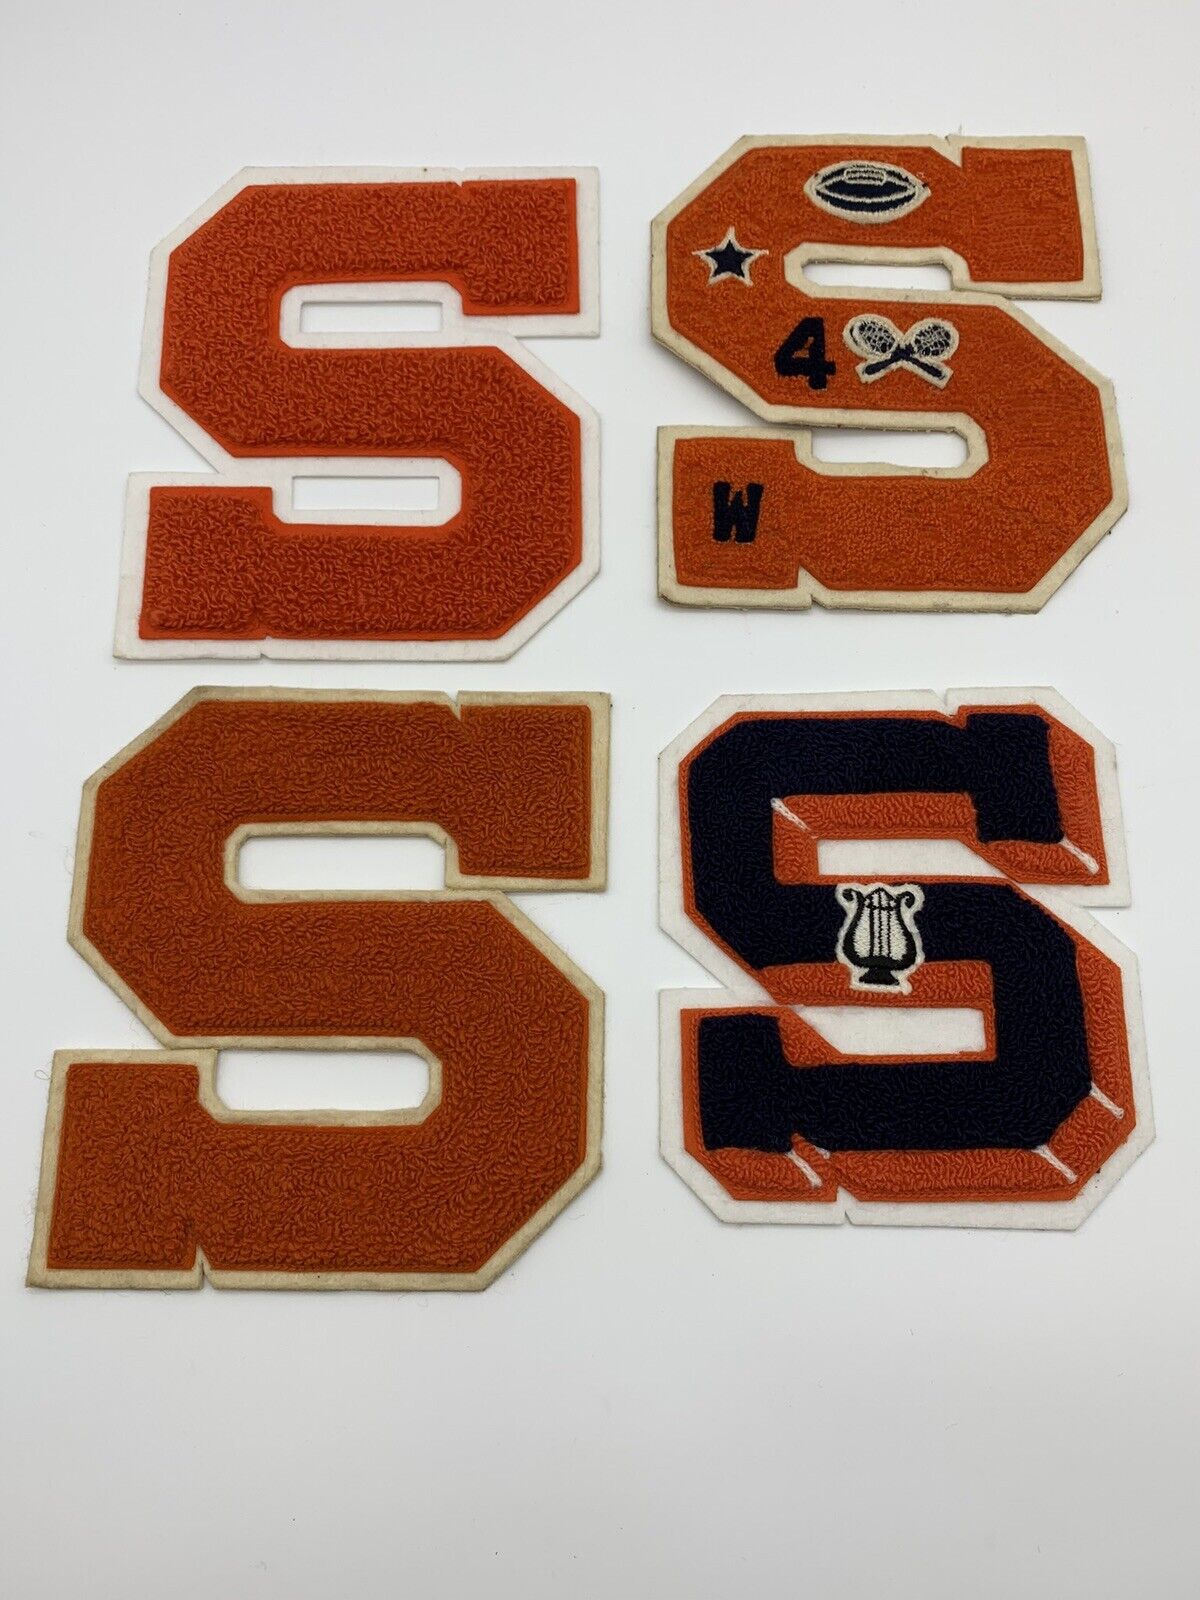 x4 Vintage Letterman “S” Patch Lot Orange Navy Syracuse 6-7” Patches Football